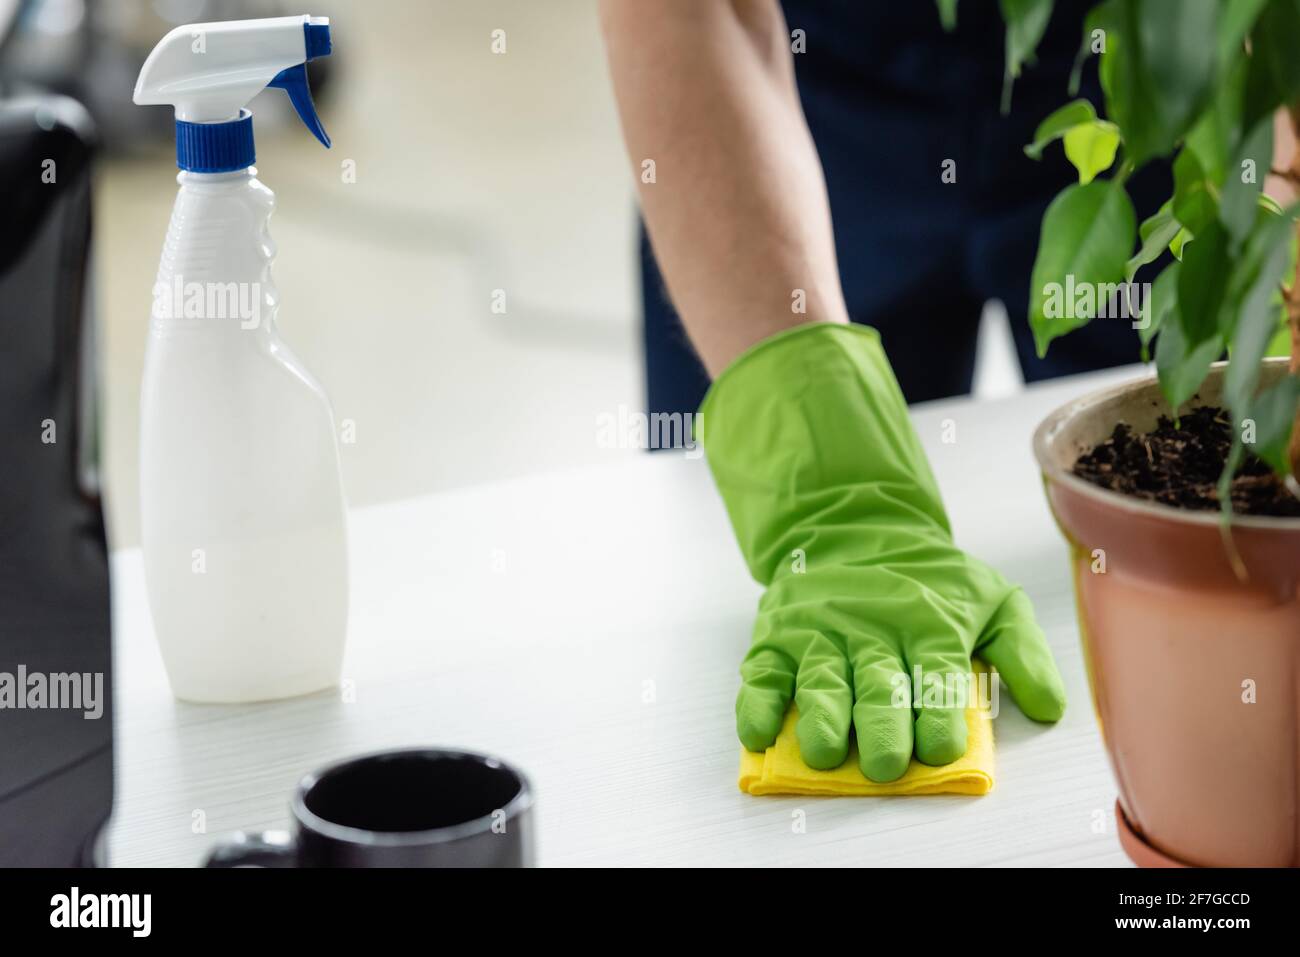 https://c8.alamy.com/comp/2F7GCCD/cropped-view-of-cleaner-in-rubber-glove-cleaning-table-near-plant-and-detergent-in-office-2F7GCCD.jpg